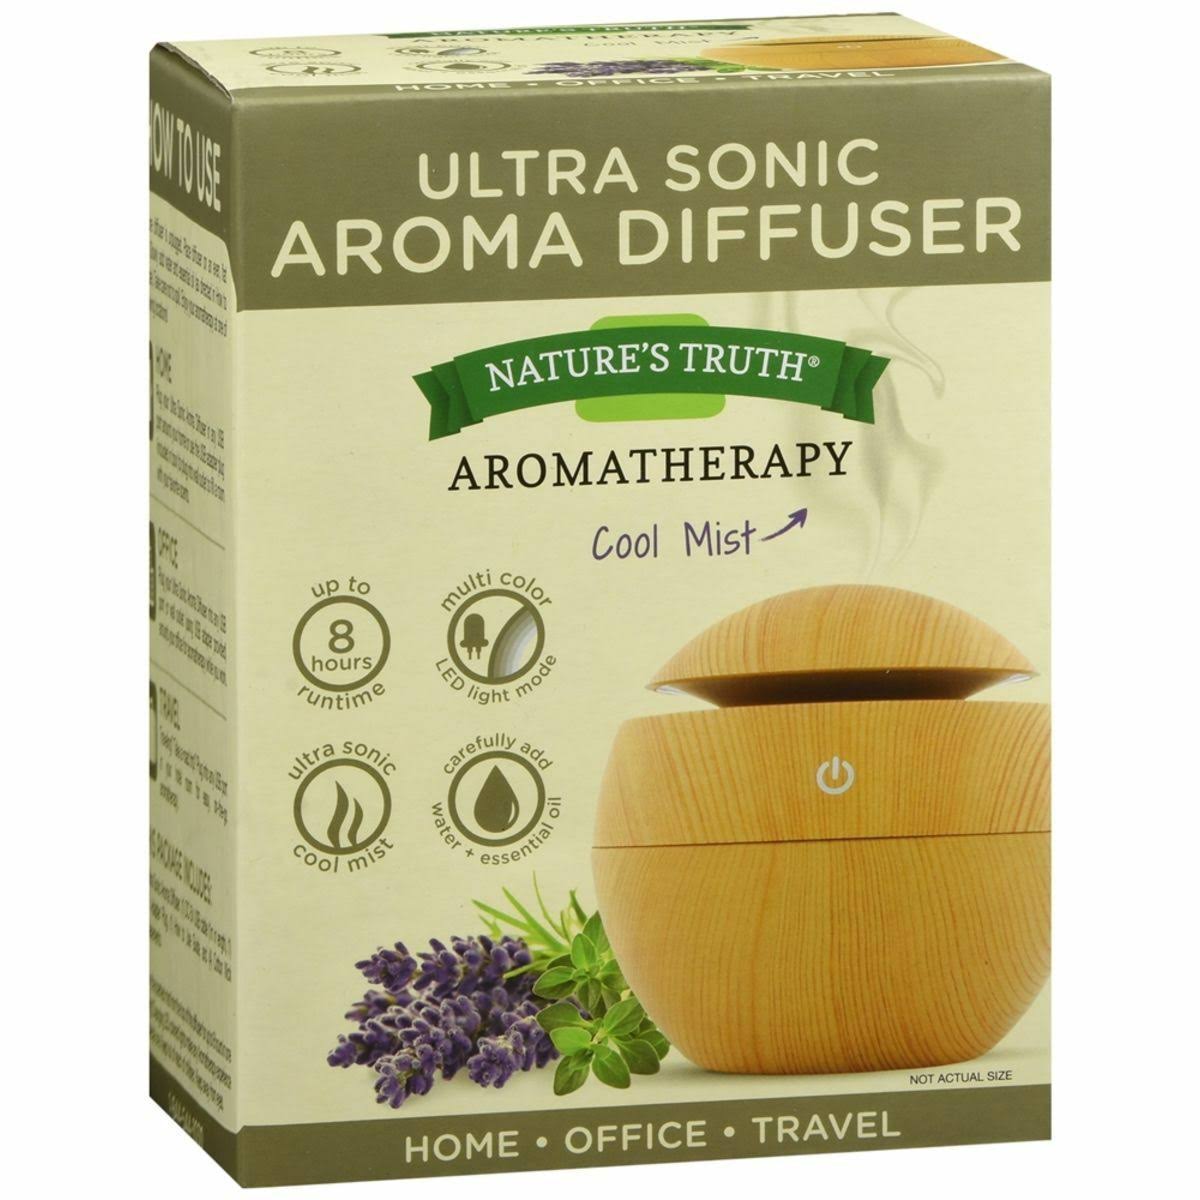 Nature's Truth Aromatherapy Aroma Diffuser - Cool Mist